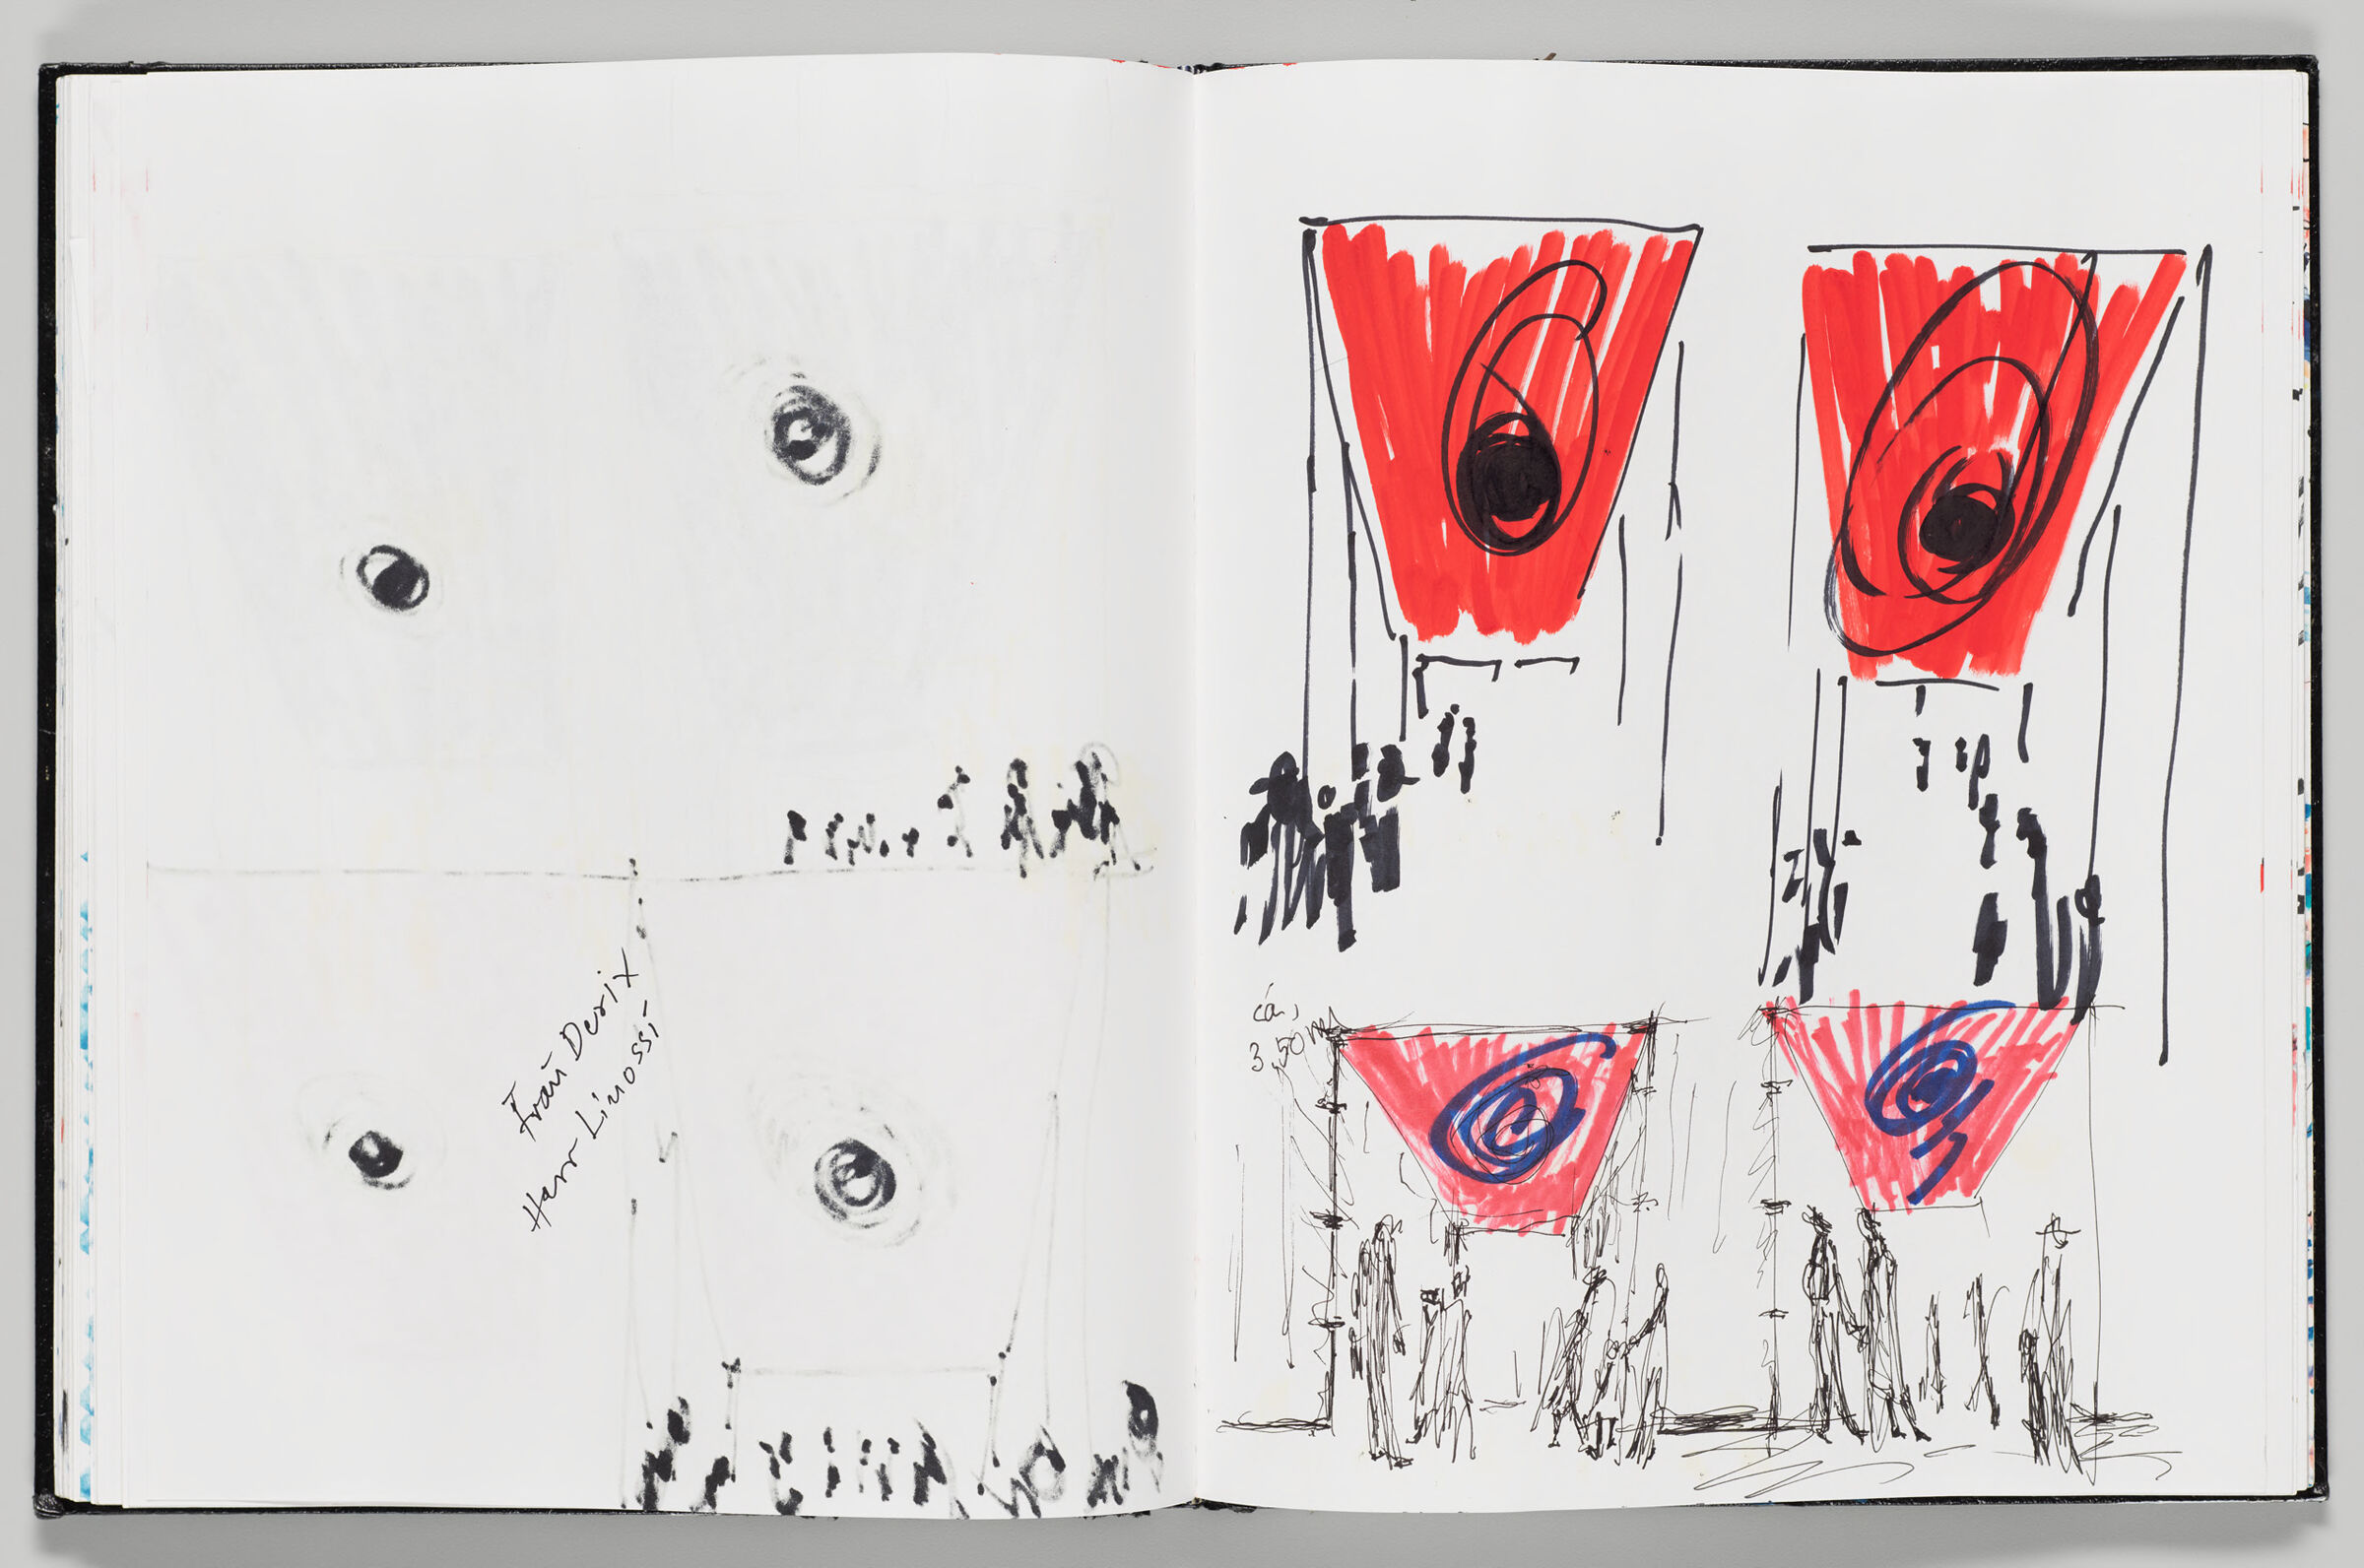 Untitled (Bleed-Through From Previous Page, Left Page); Untitled (Mosaic Designs, Right Page)